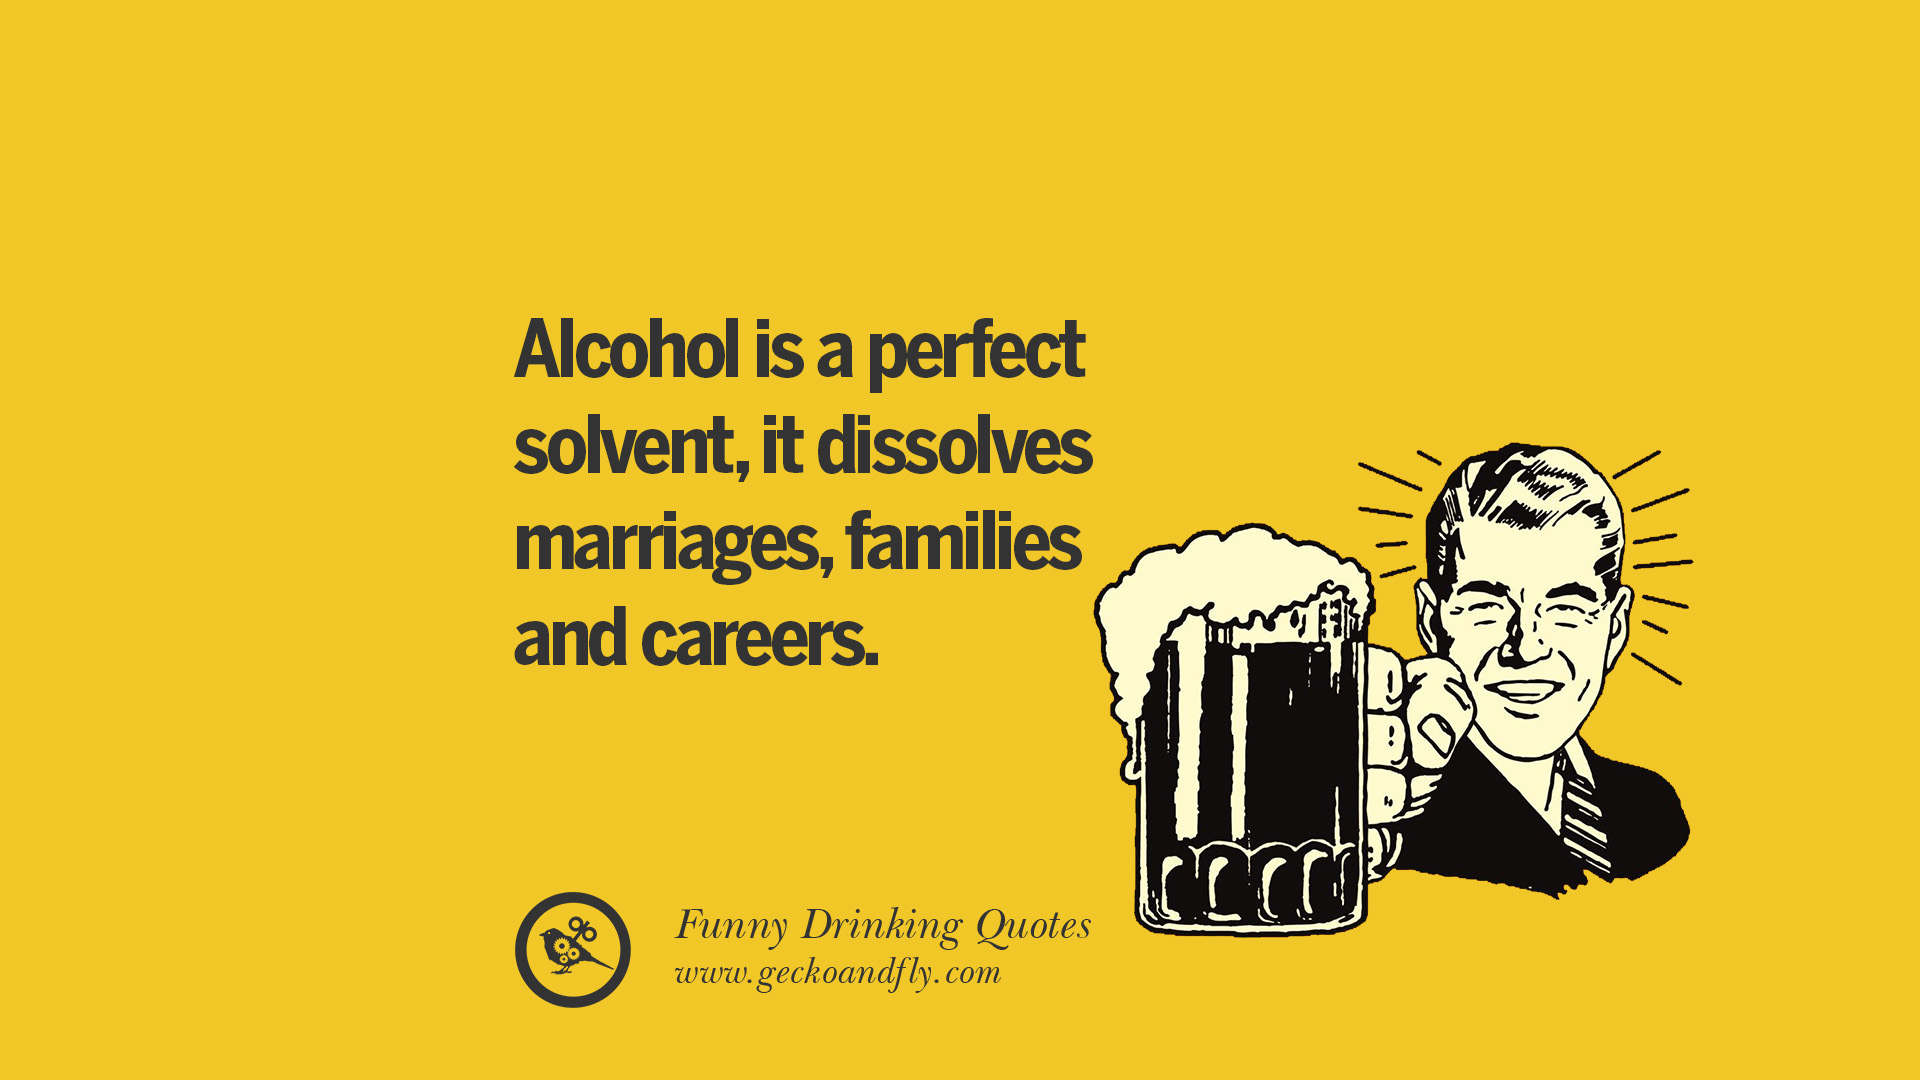 Alcohol drinking funny beer quotes wine solvent fun quote dissolves careers marriages families perfect having